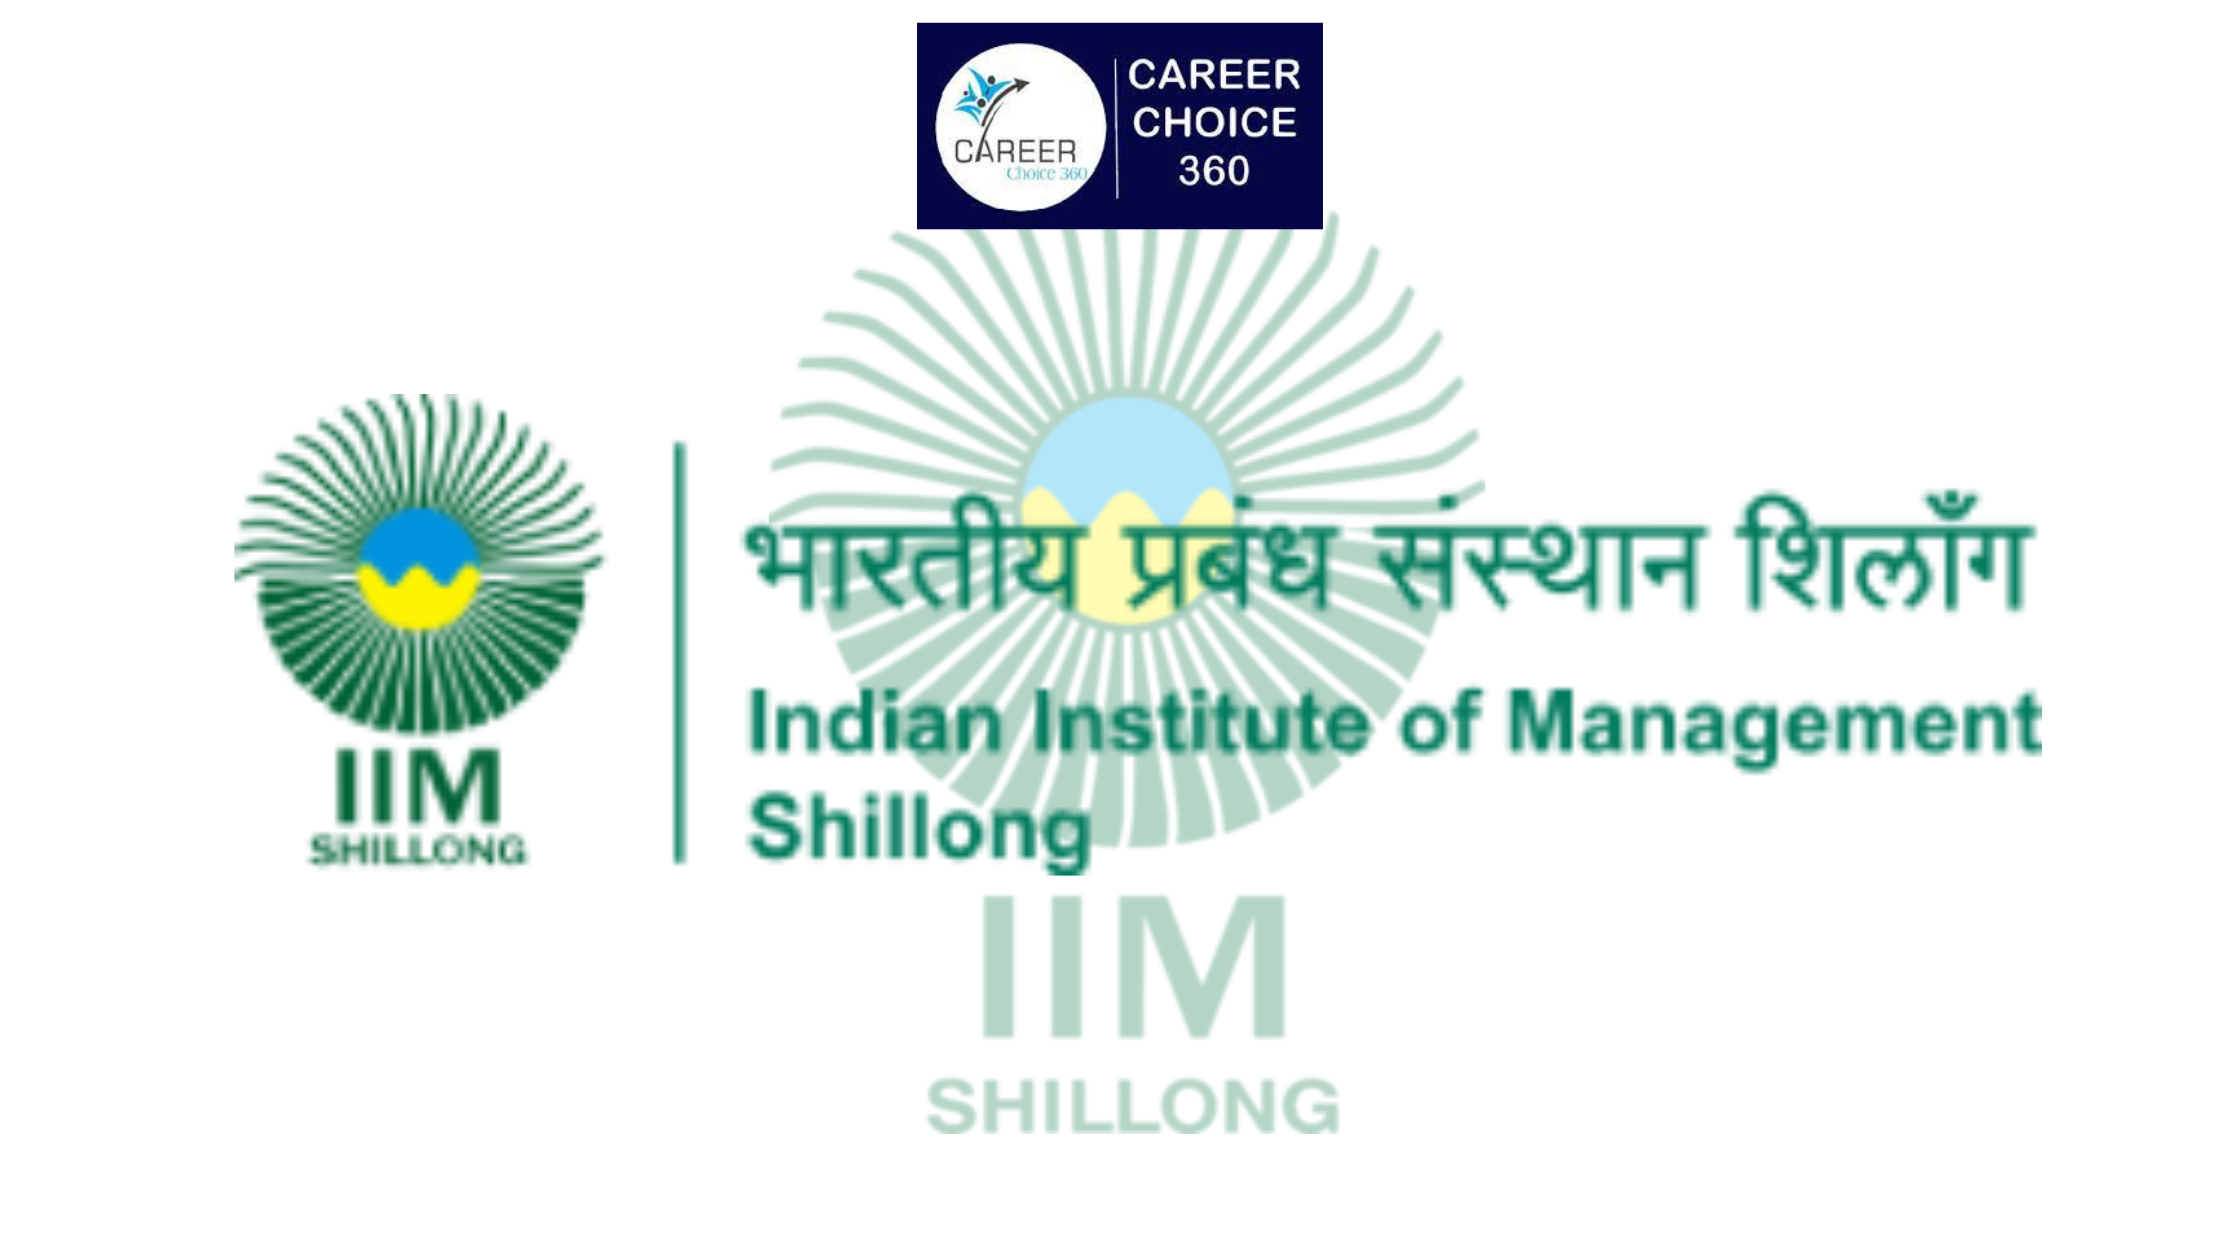 You are currently viewing Indian Institute of Management of Shillong (IIM Shillong) : Course & Fees, Admission procedure, Rankings, and Placements